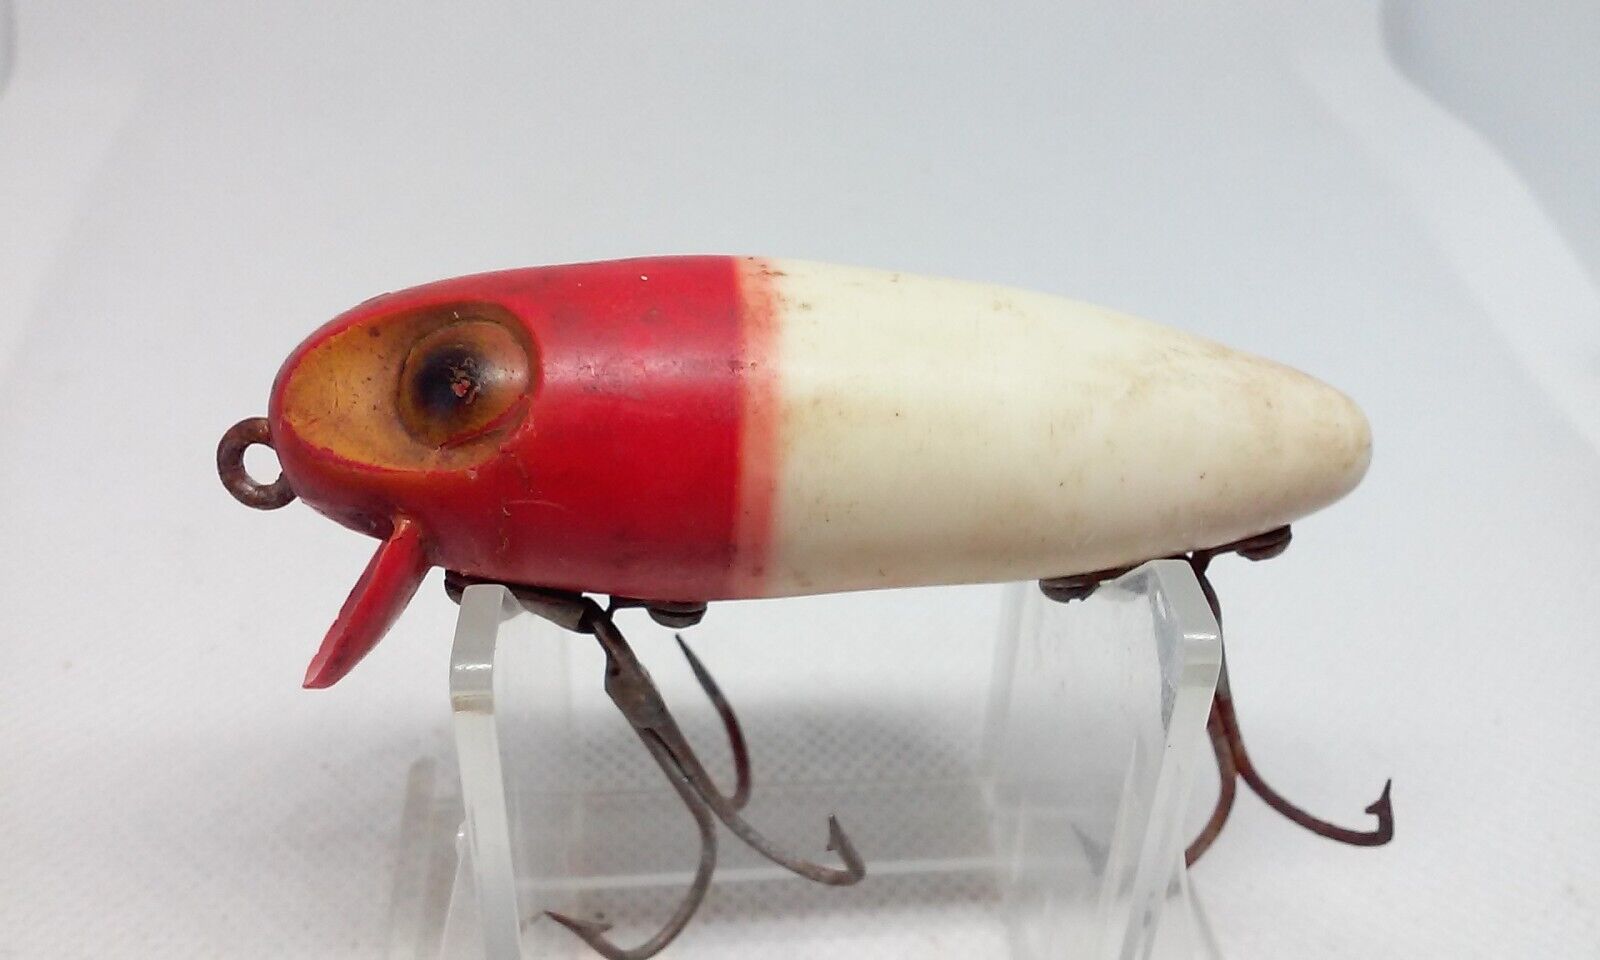 Vintage Wright & McGill Bug-A-Boo Red Head 2 3/4" Shallow Crankbait Fishing Lure